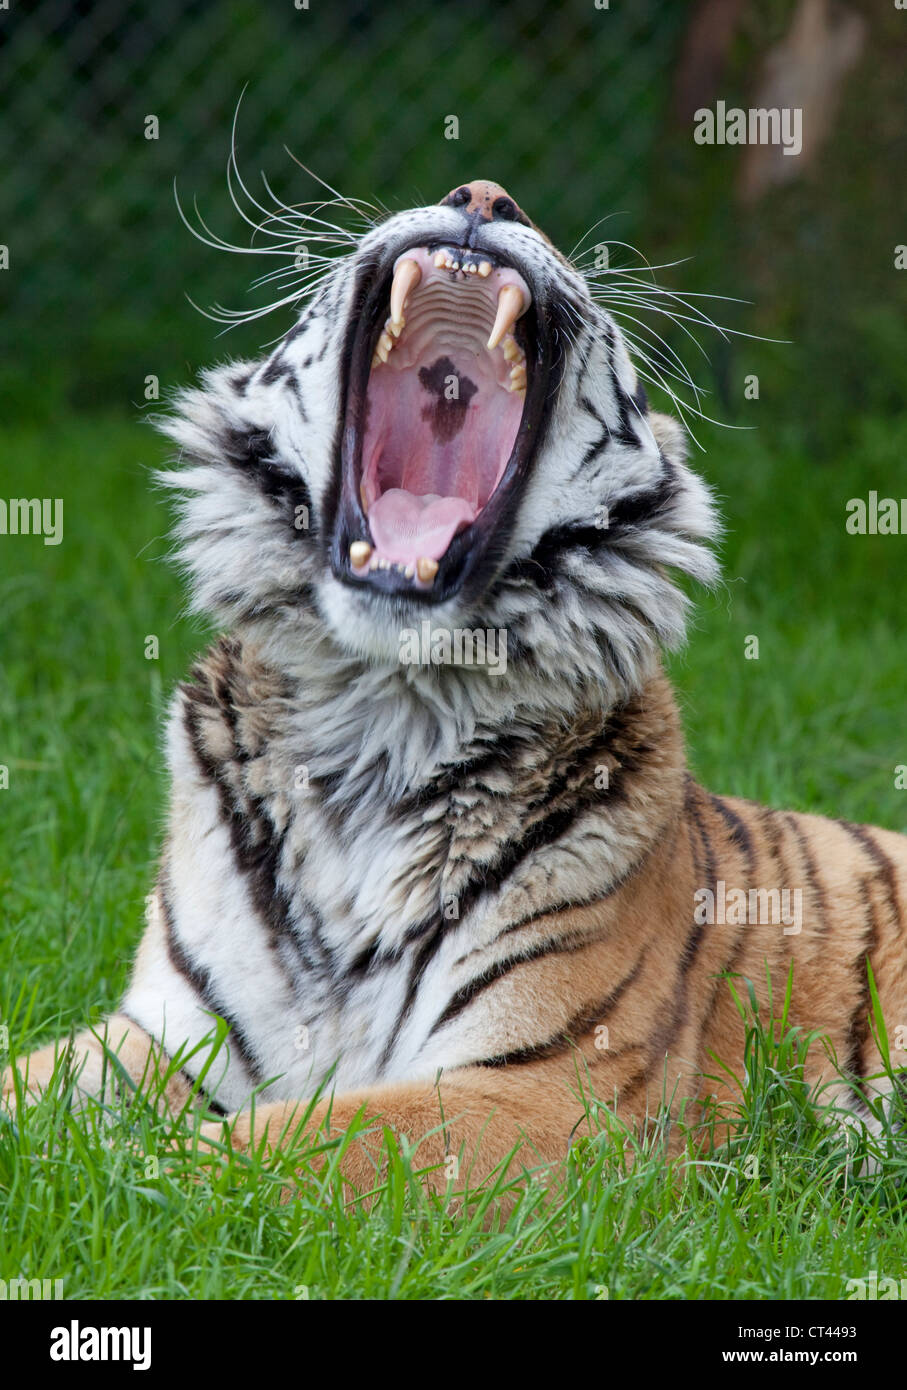 Bredd High Resolution Stock Photography and Images - Alamy